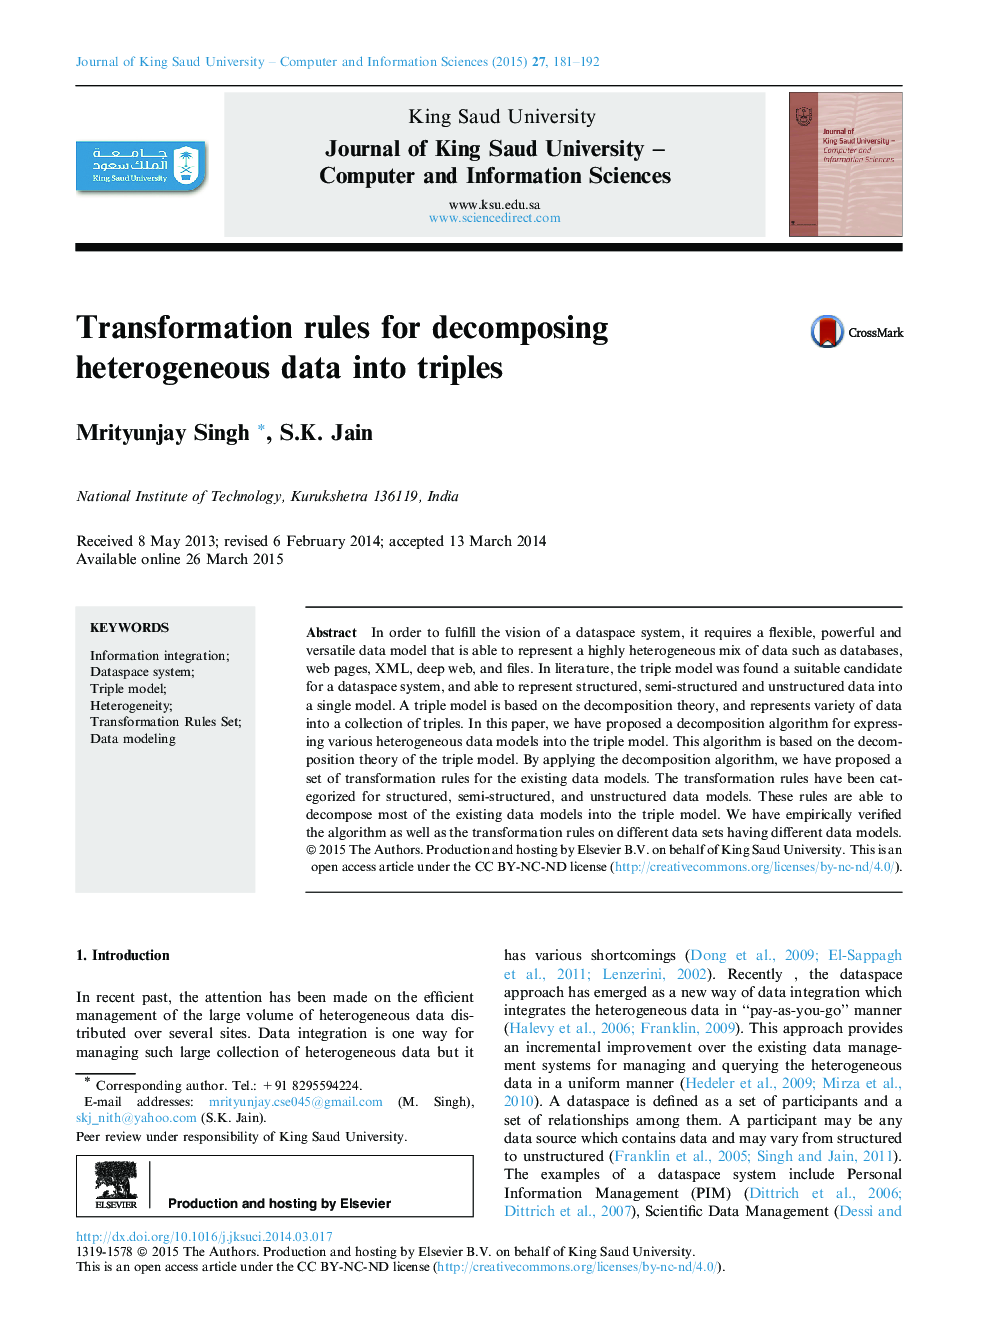 Transformation rules for decomposing heterogeneous data into triples 